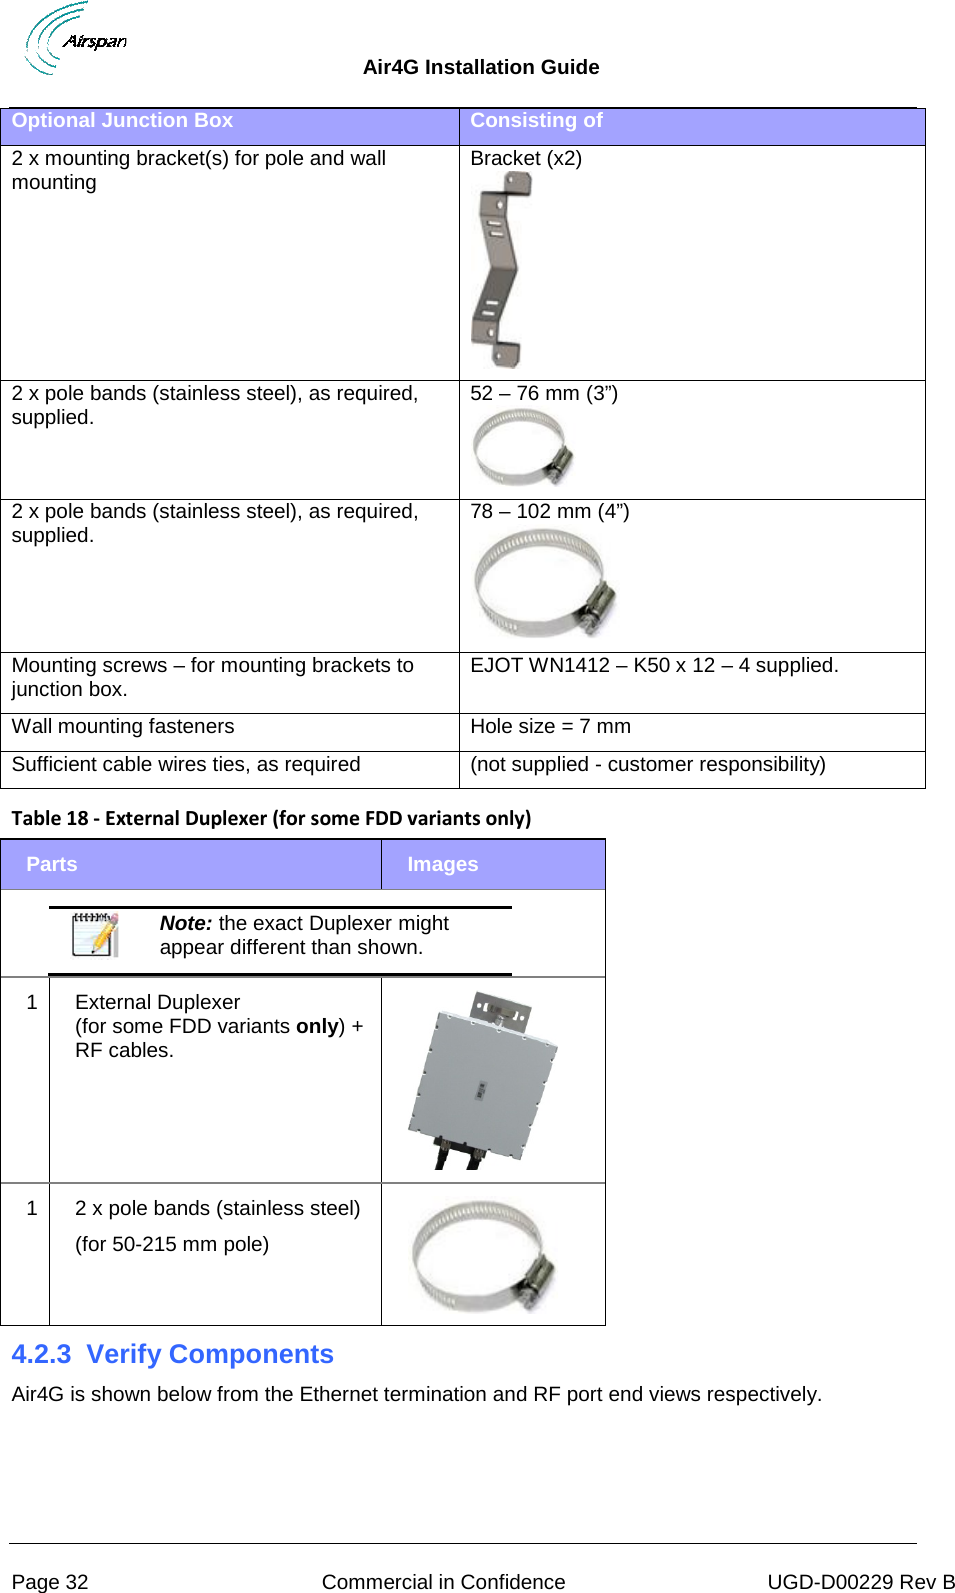  Air4G Installation Guide     Page 32 Commercial in Confidence UGD-D00229 Rev B Optional Junction Box Consisting of 2 x mounting bracket(s) for pole and wall mounting Bracket (x2)  2 x pole bands (stainless steel), as required, supplied. 52 – 76 mm (3”)  2 x pole bands (stainless steel), as required, supplied. 78 – 102 mm (4”)  Mounting screws – for mounting brackets to junction box. EJOT WN1412 – K50 x 12 – 4 supplied. Wall mounting fasteners  Hole size = 7 mm  Sufficient cable wires ties, as required (not supplied - customer responsibility)  Table 18 - External Duplexer (for some FDD variants only) Parts Images    Note: the exact Duplexer might appear different than shown.  1  External Duplexer  (for some FDD variants only) + RF cables.  1  2 x pole bands (stainless steel) (for 50-215 mm pole)  4.2.3  Verify Components Air4G is shown below from the Ethernet termination and RF port end views respectively. 